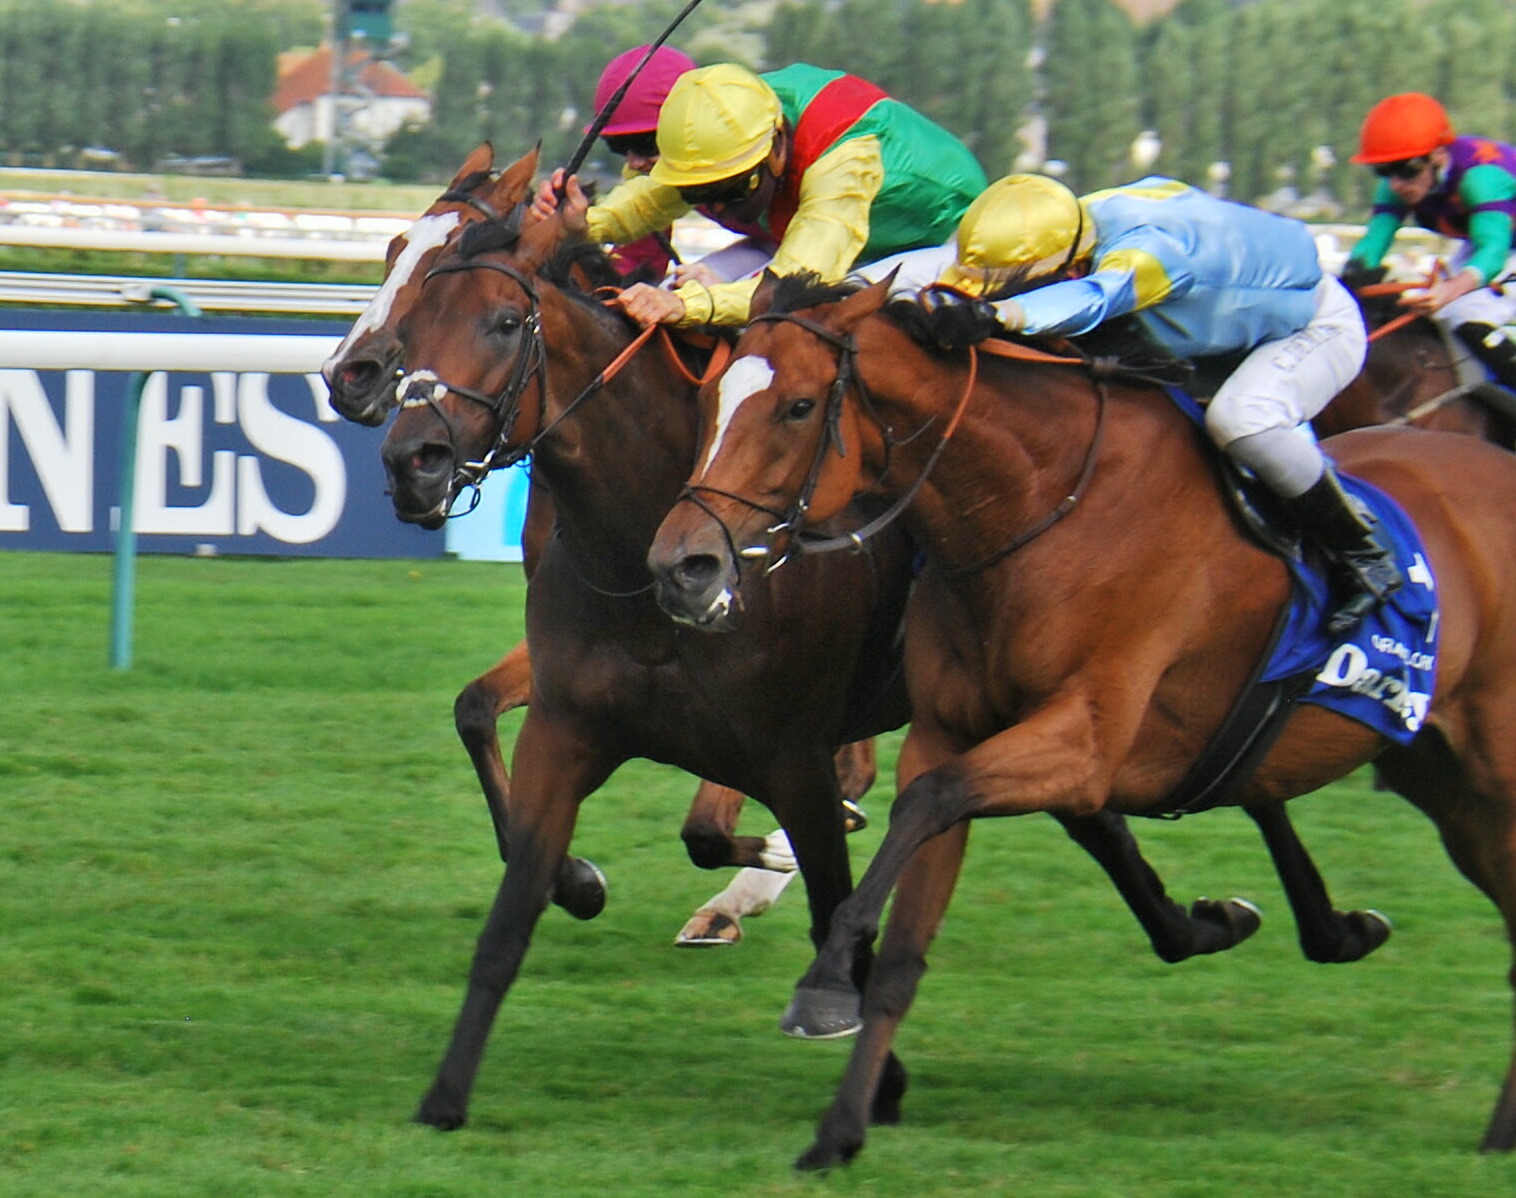 G1 glory: Grand Glory (blue and yellow) just gets the better of Audarya in the Prix Jean Romanet at Deauville in August. Photo: John Gilmore